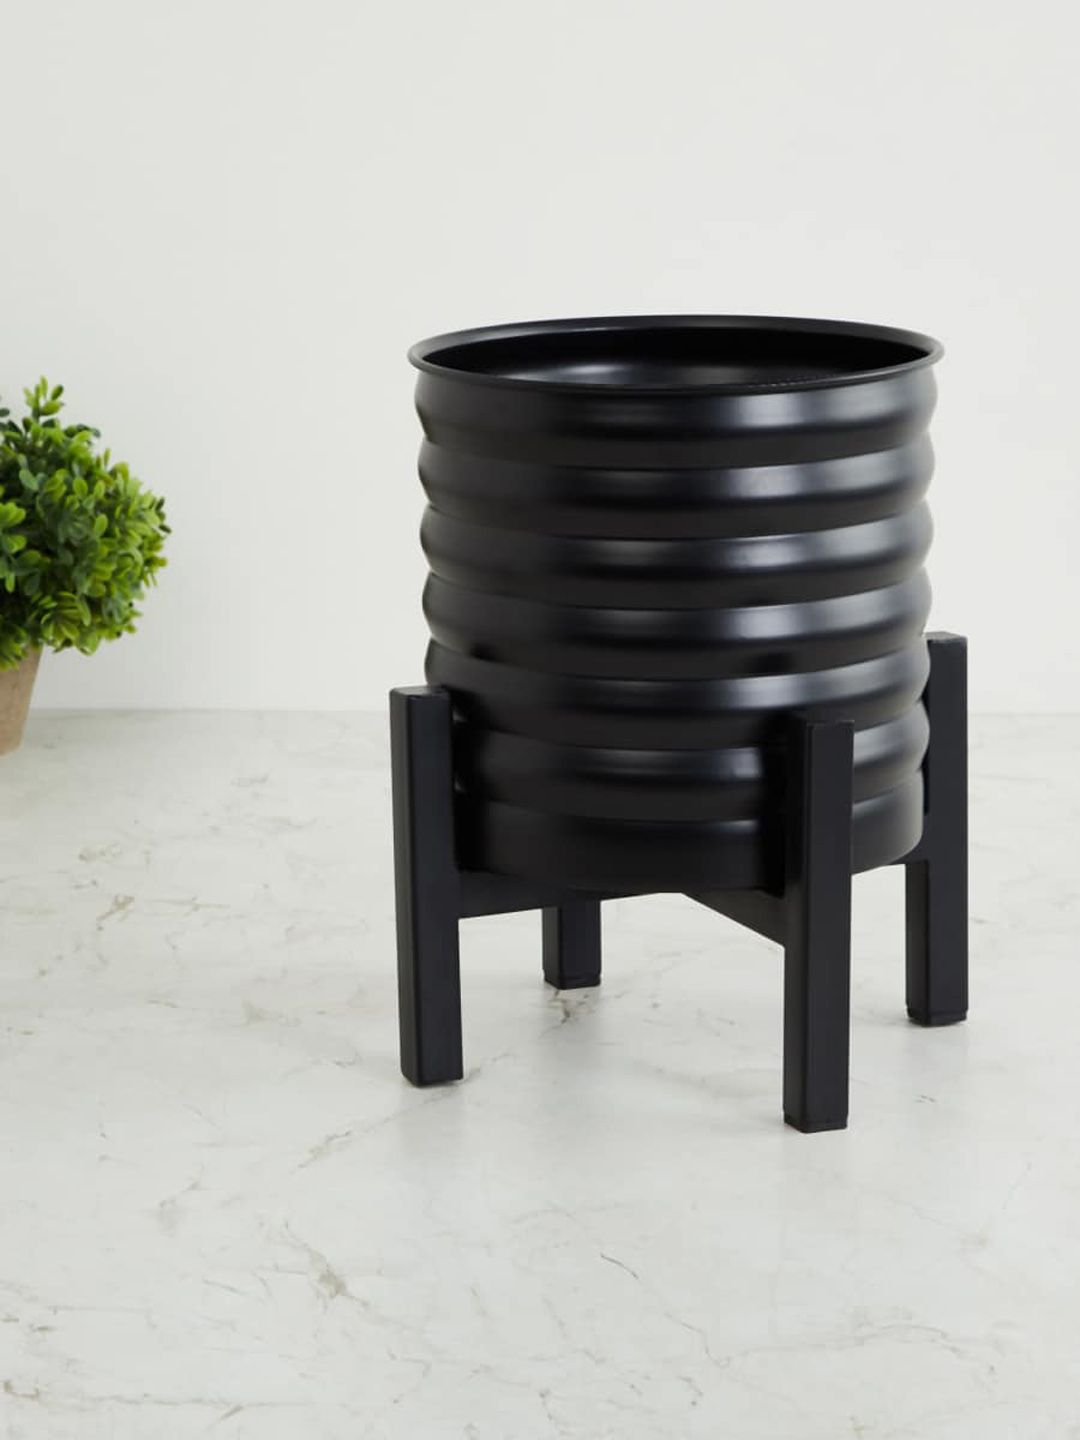 Home Centre Black Fiesta Ribbed Metal Planter With Stand Price in India